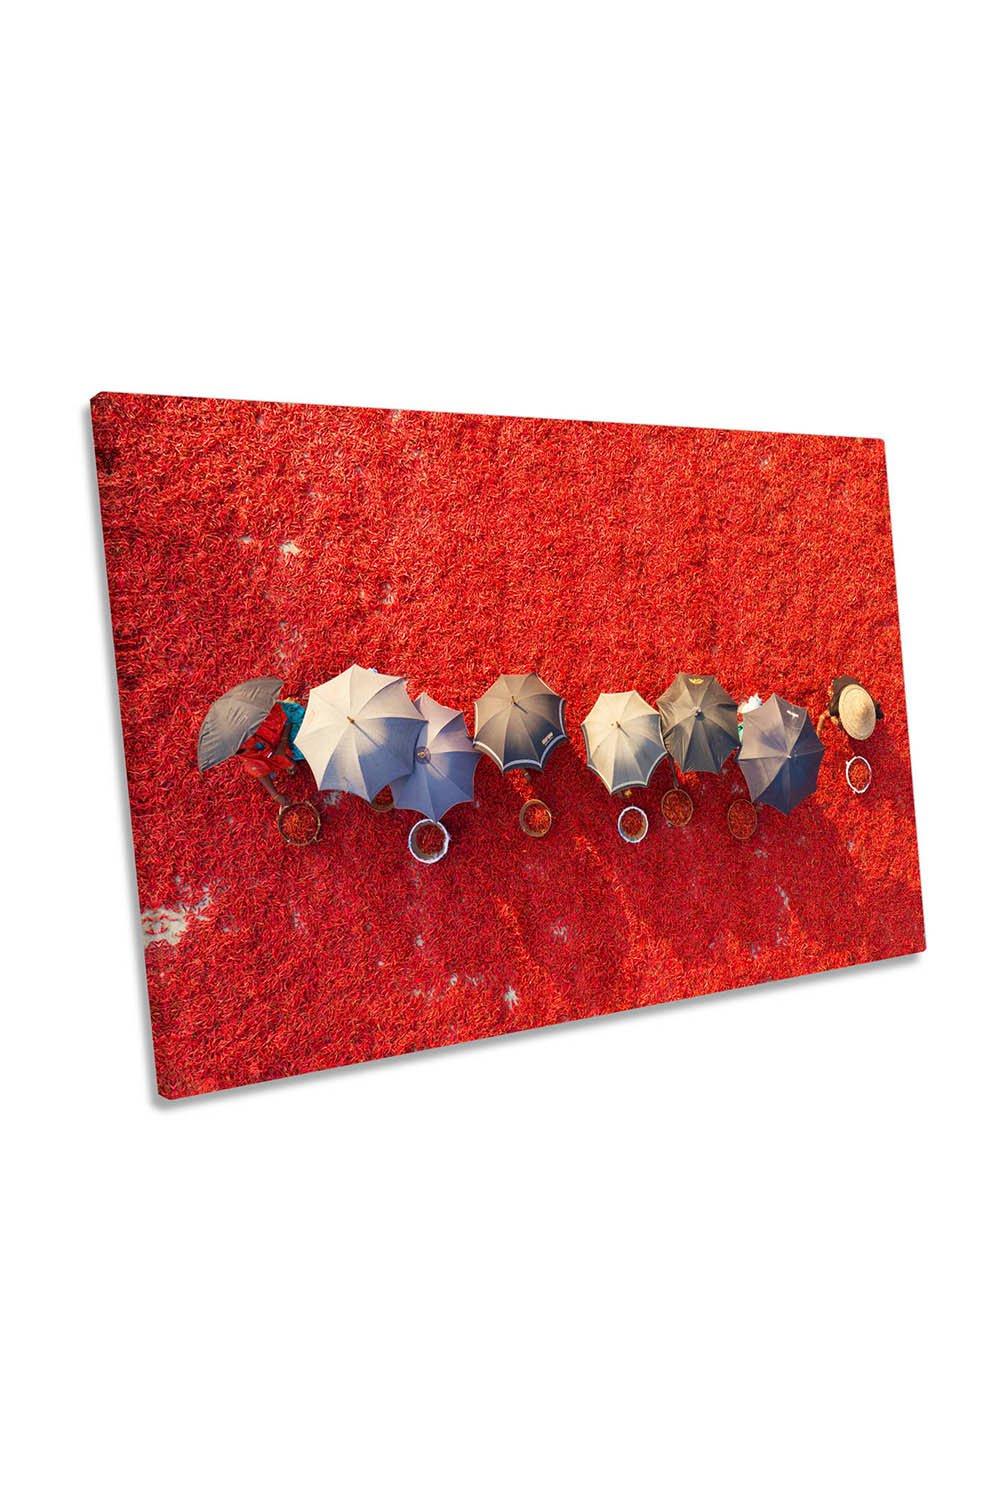 Working the Red Carpet Chilli Pickers Umbrella Canvas Wall Art Picture Print